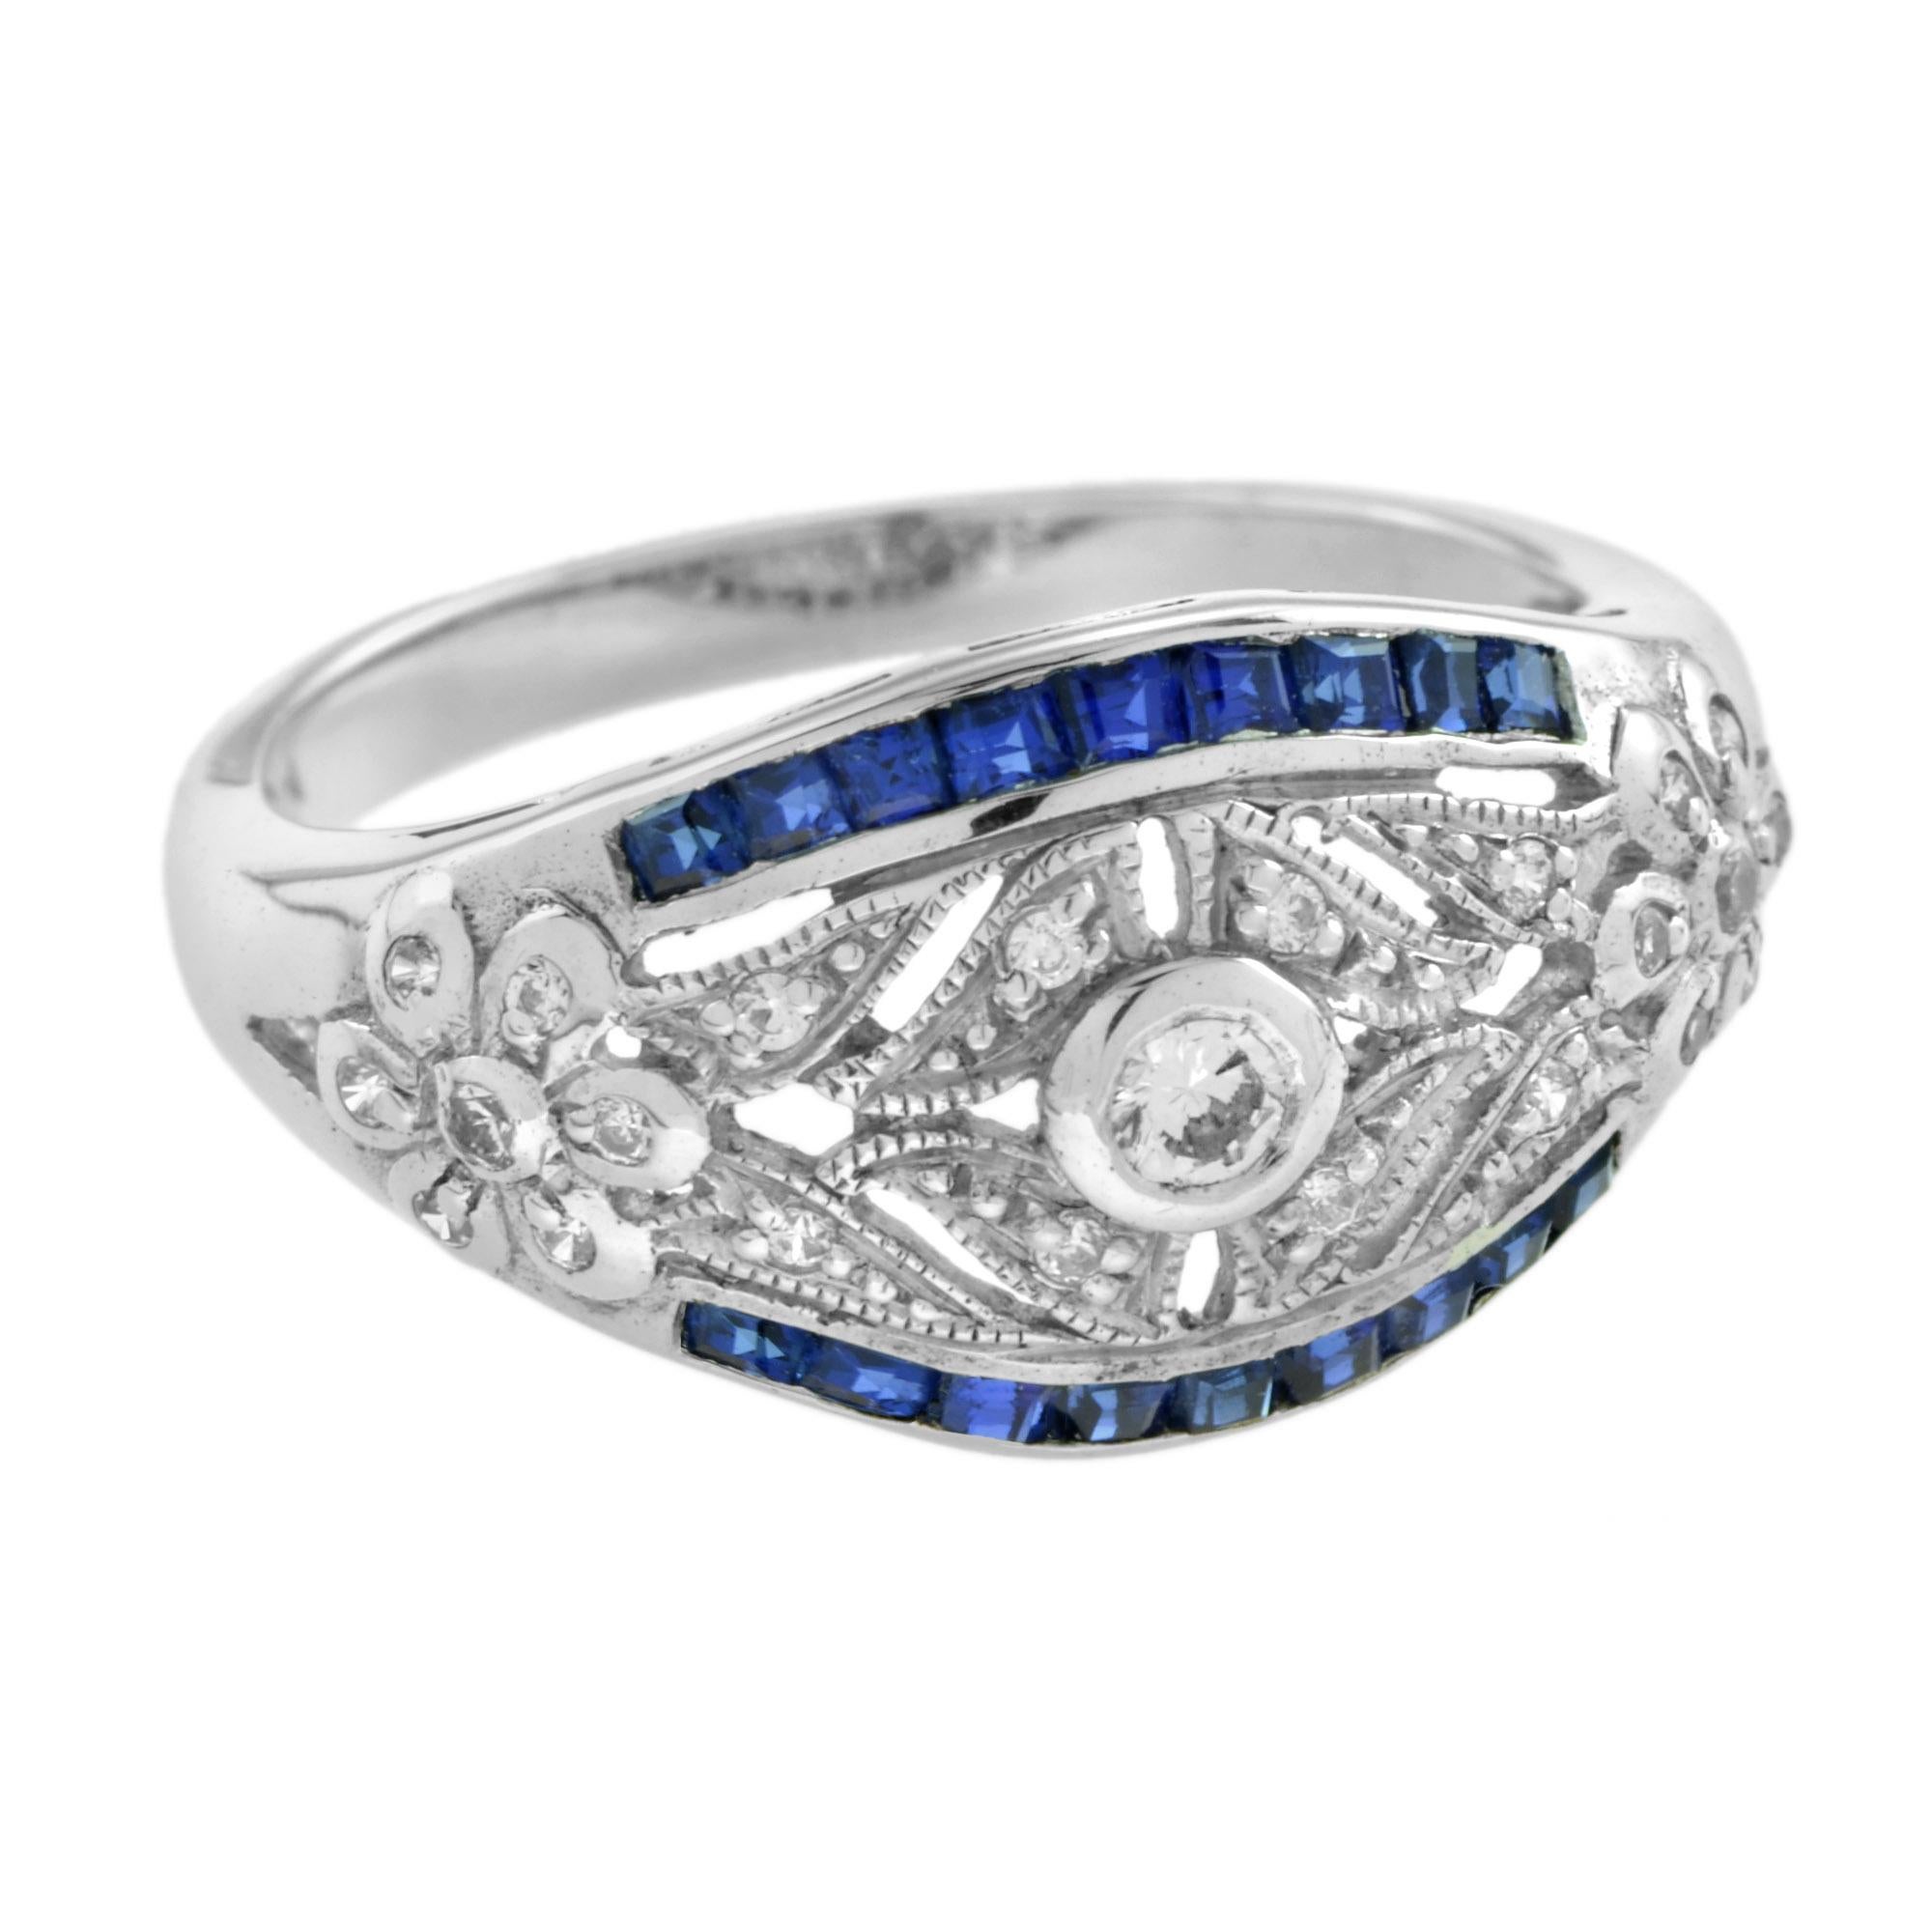 For Sale:  Art Deco Style Diamond and Sapphire Ring in 14K White Gold 3